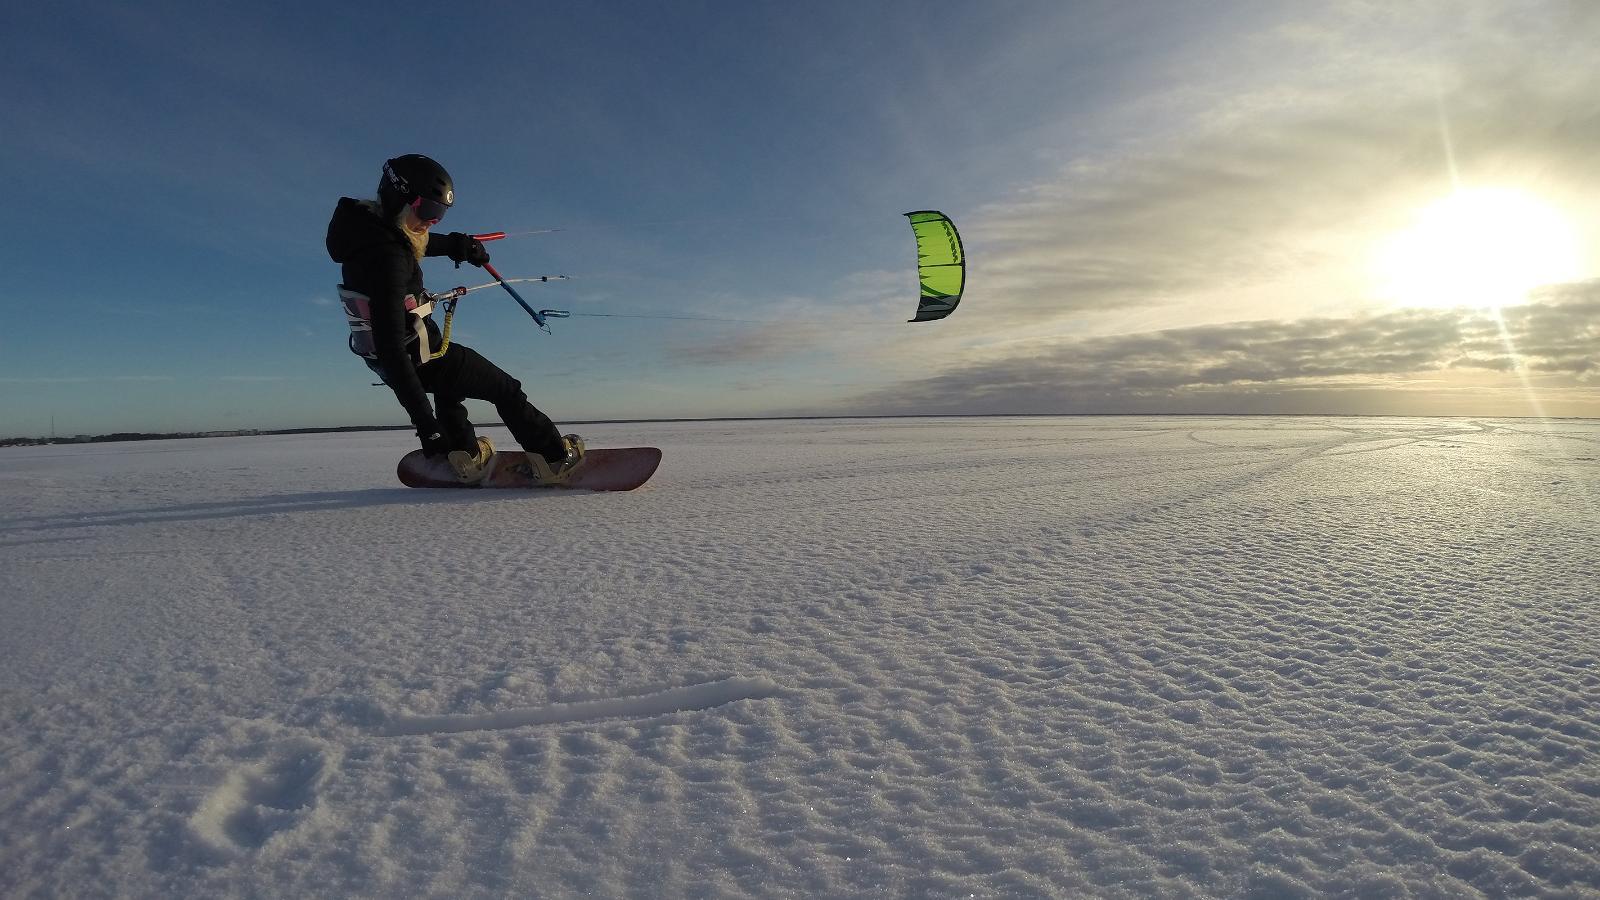 We ride and train in winter, too. Why queue for the mountain, come and kitesurf.